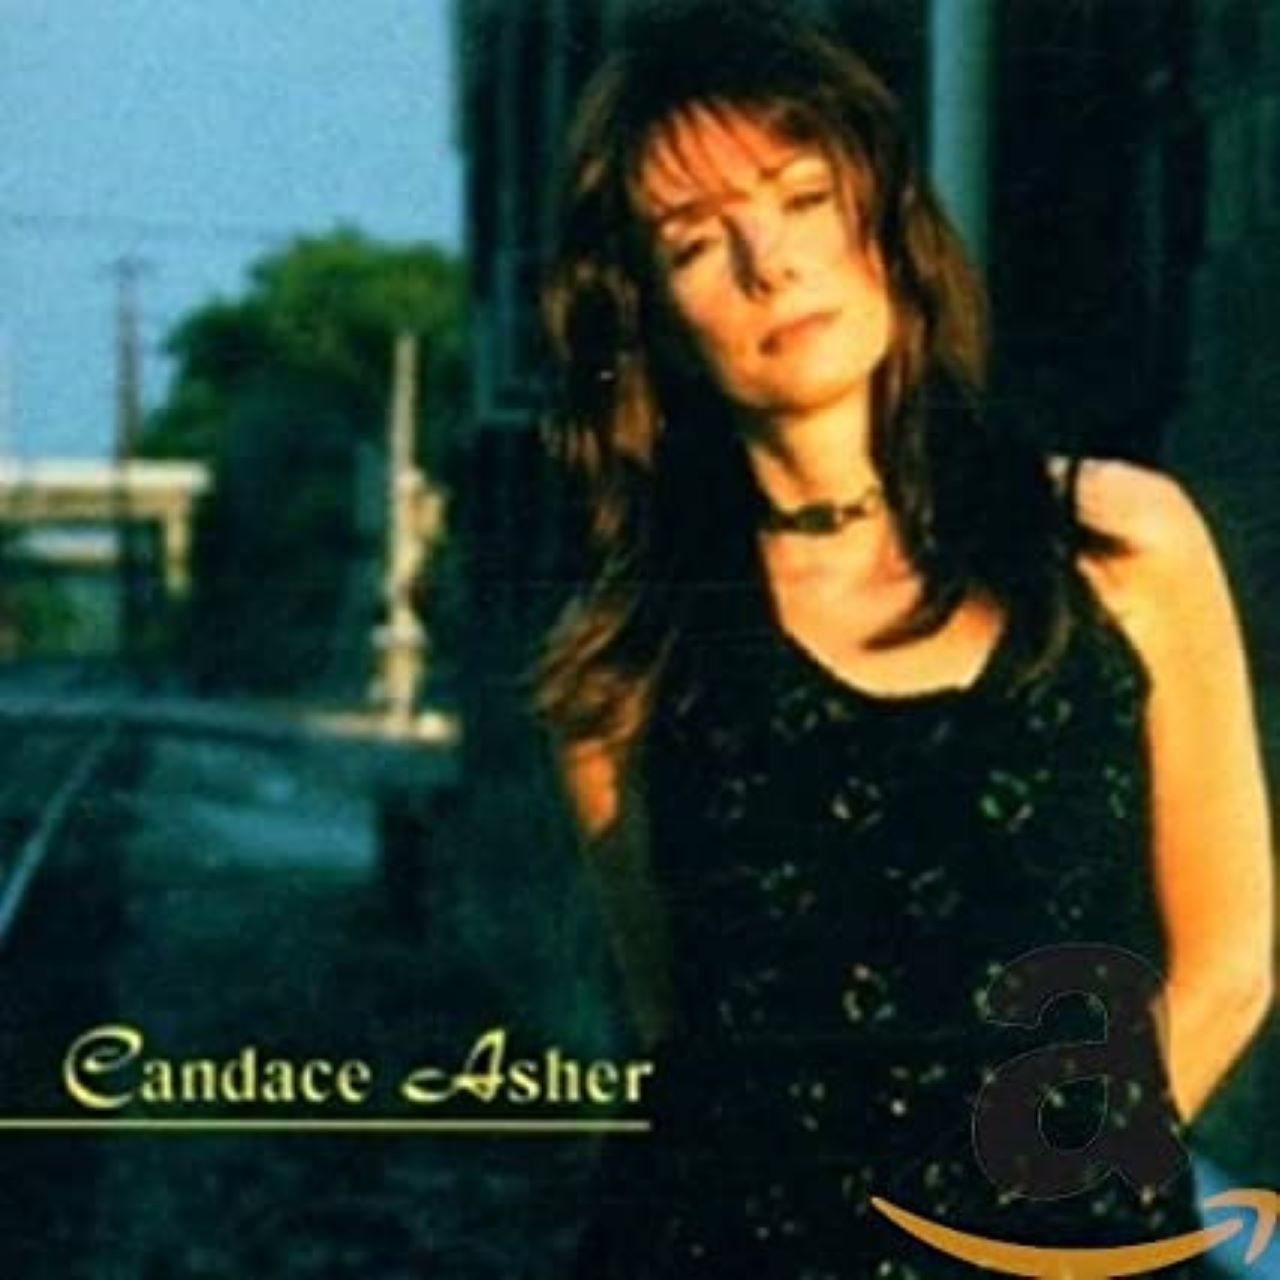 Candace Asher - Candace Asher cover album